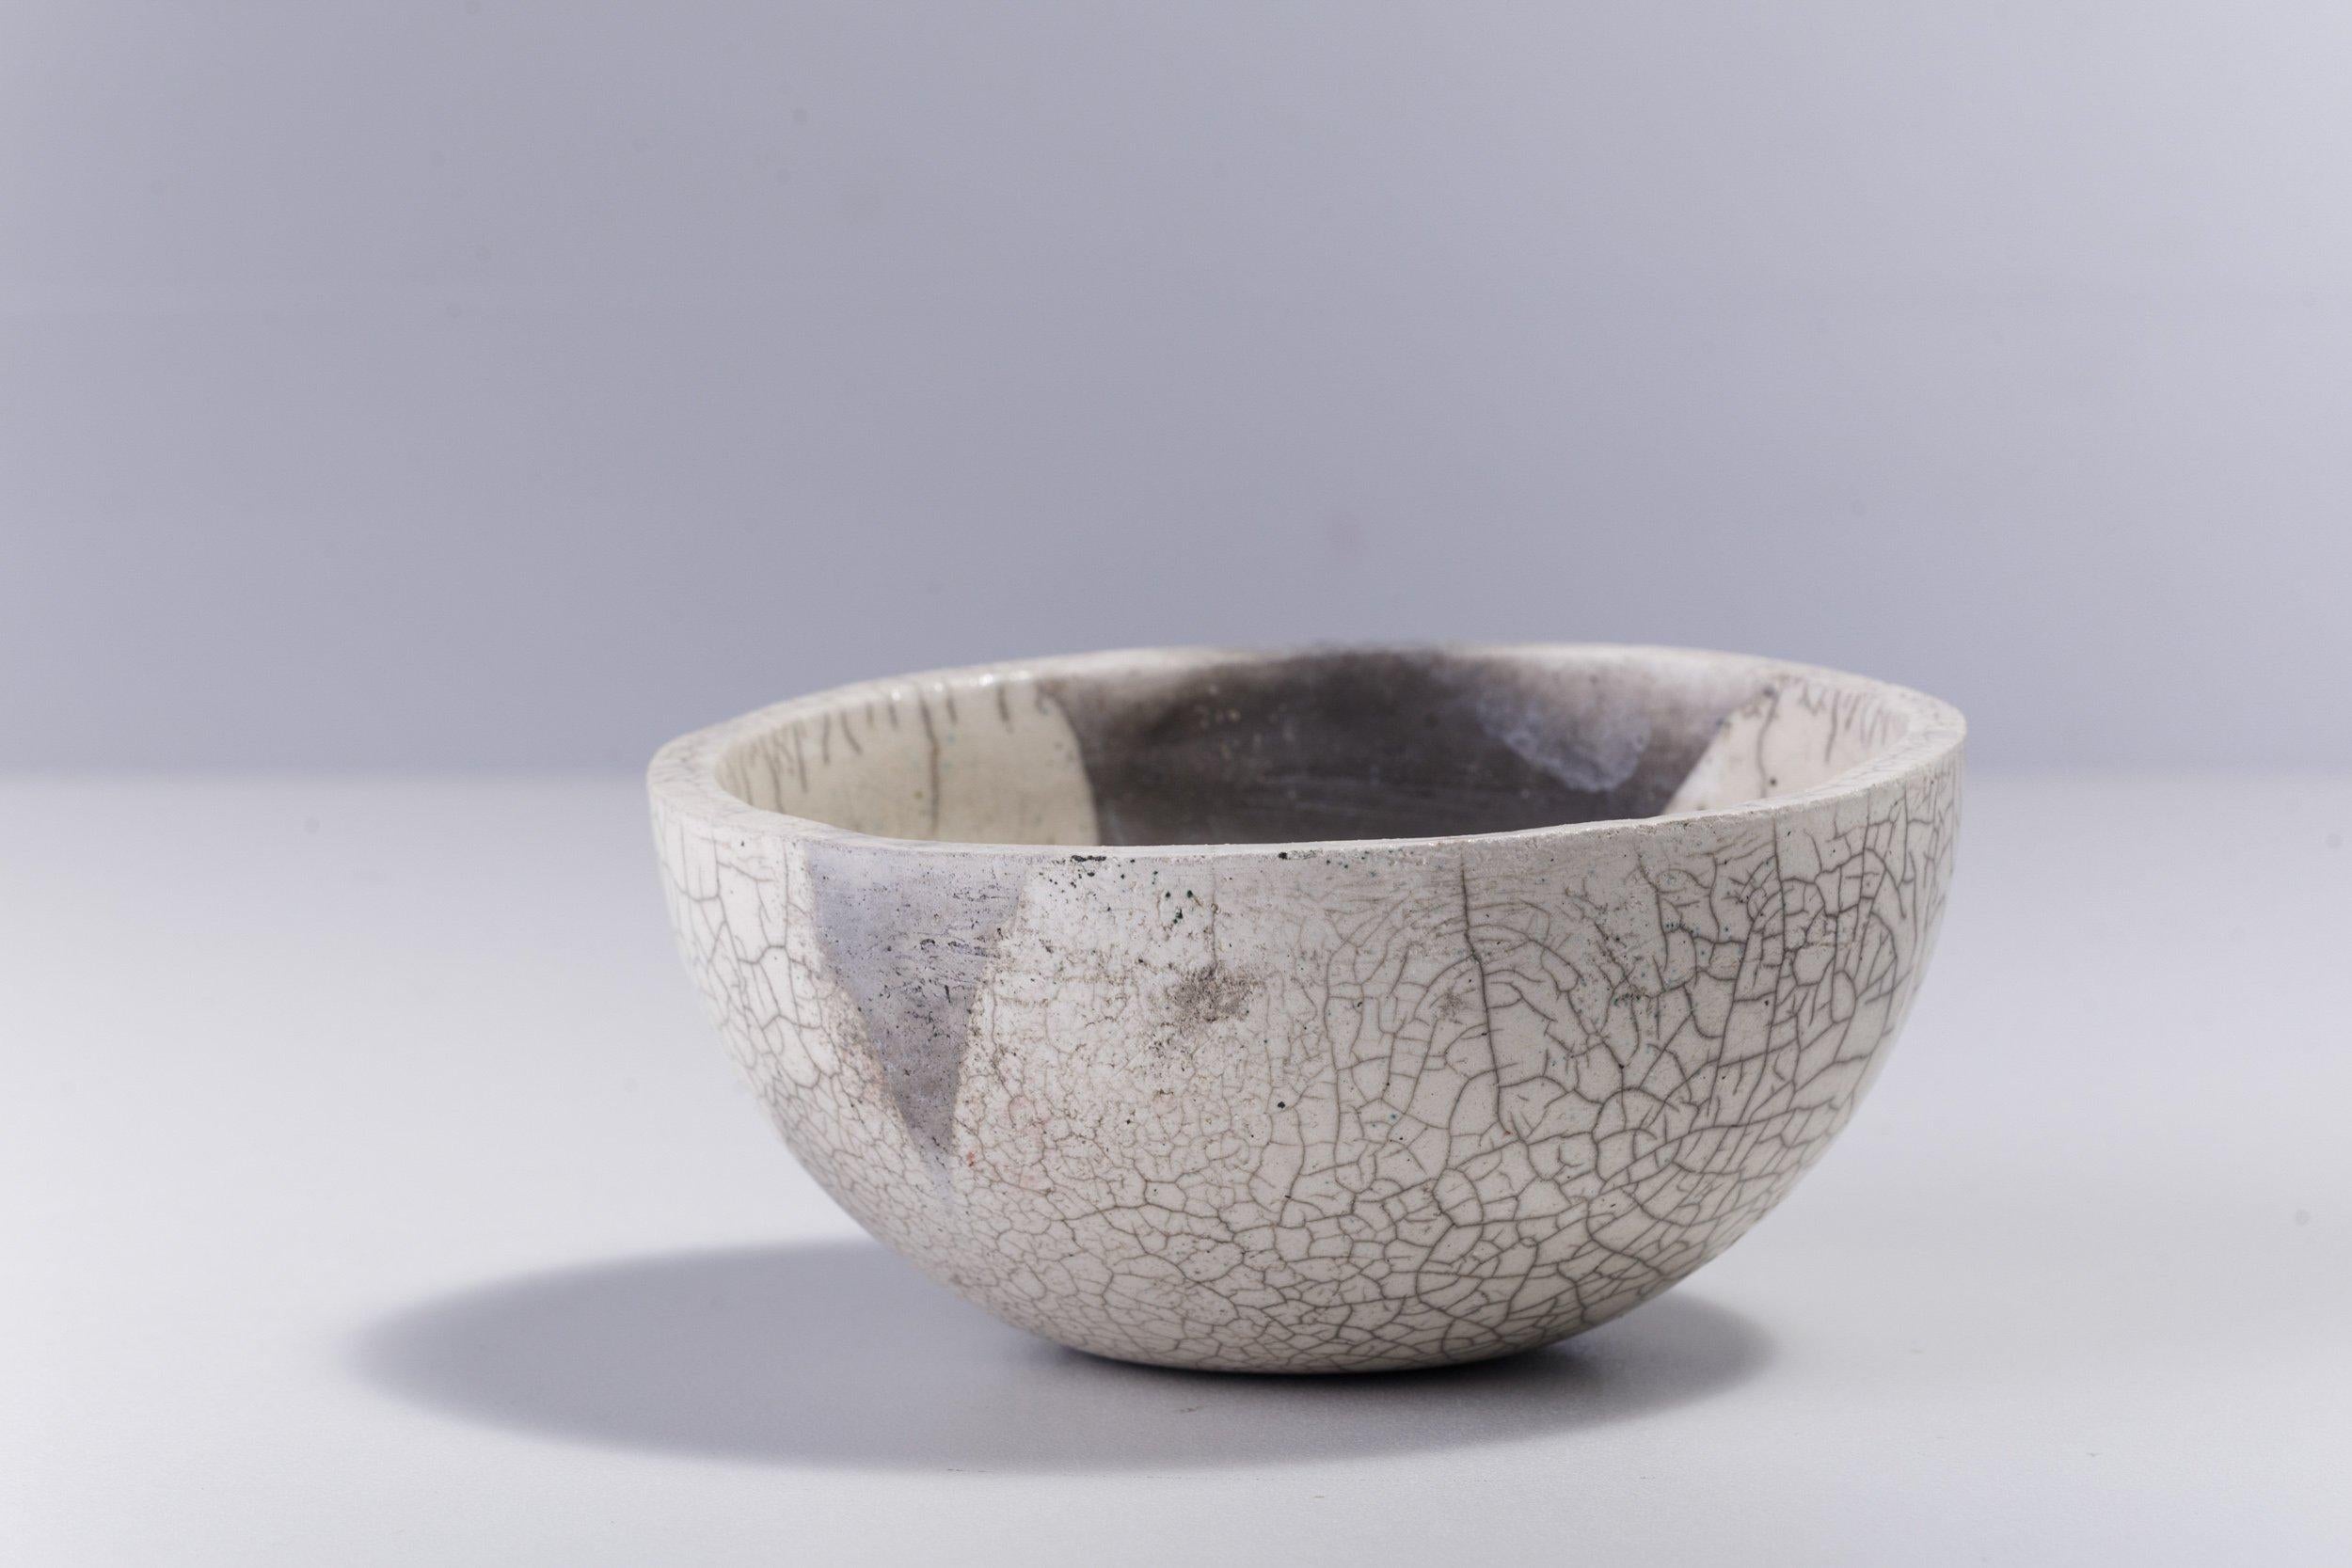 Japanese Minimalistic LAAB Fringe Chawan Bowl Raku Ceramics Crackle White In New Condition For Sale In monza, Monza and Brianza